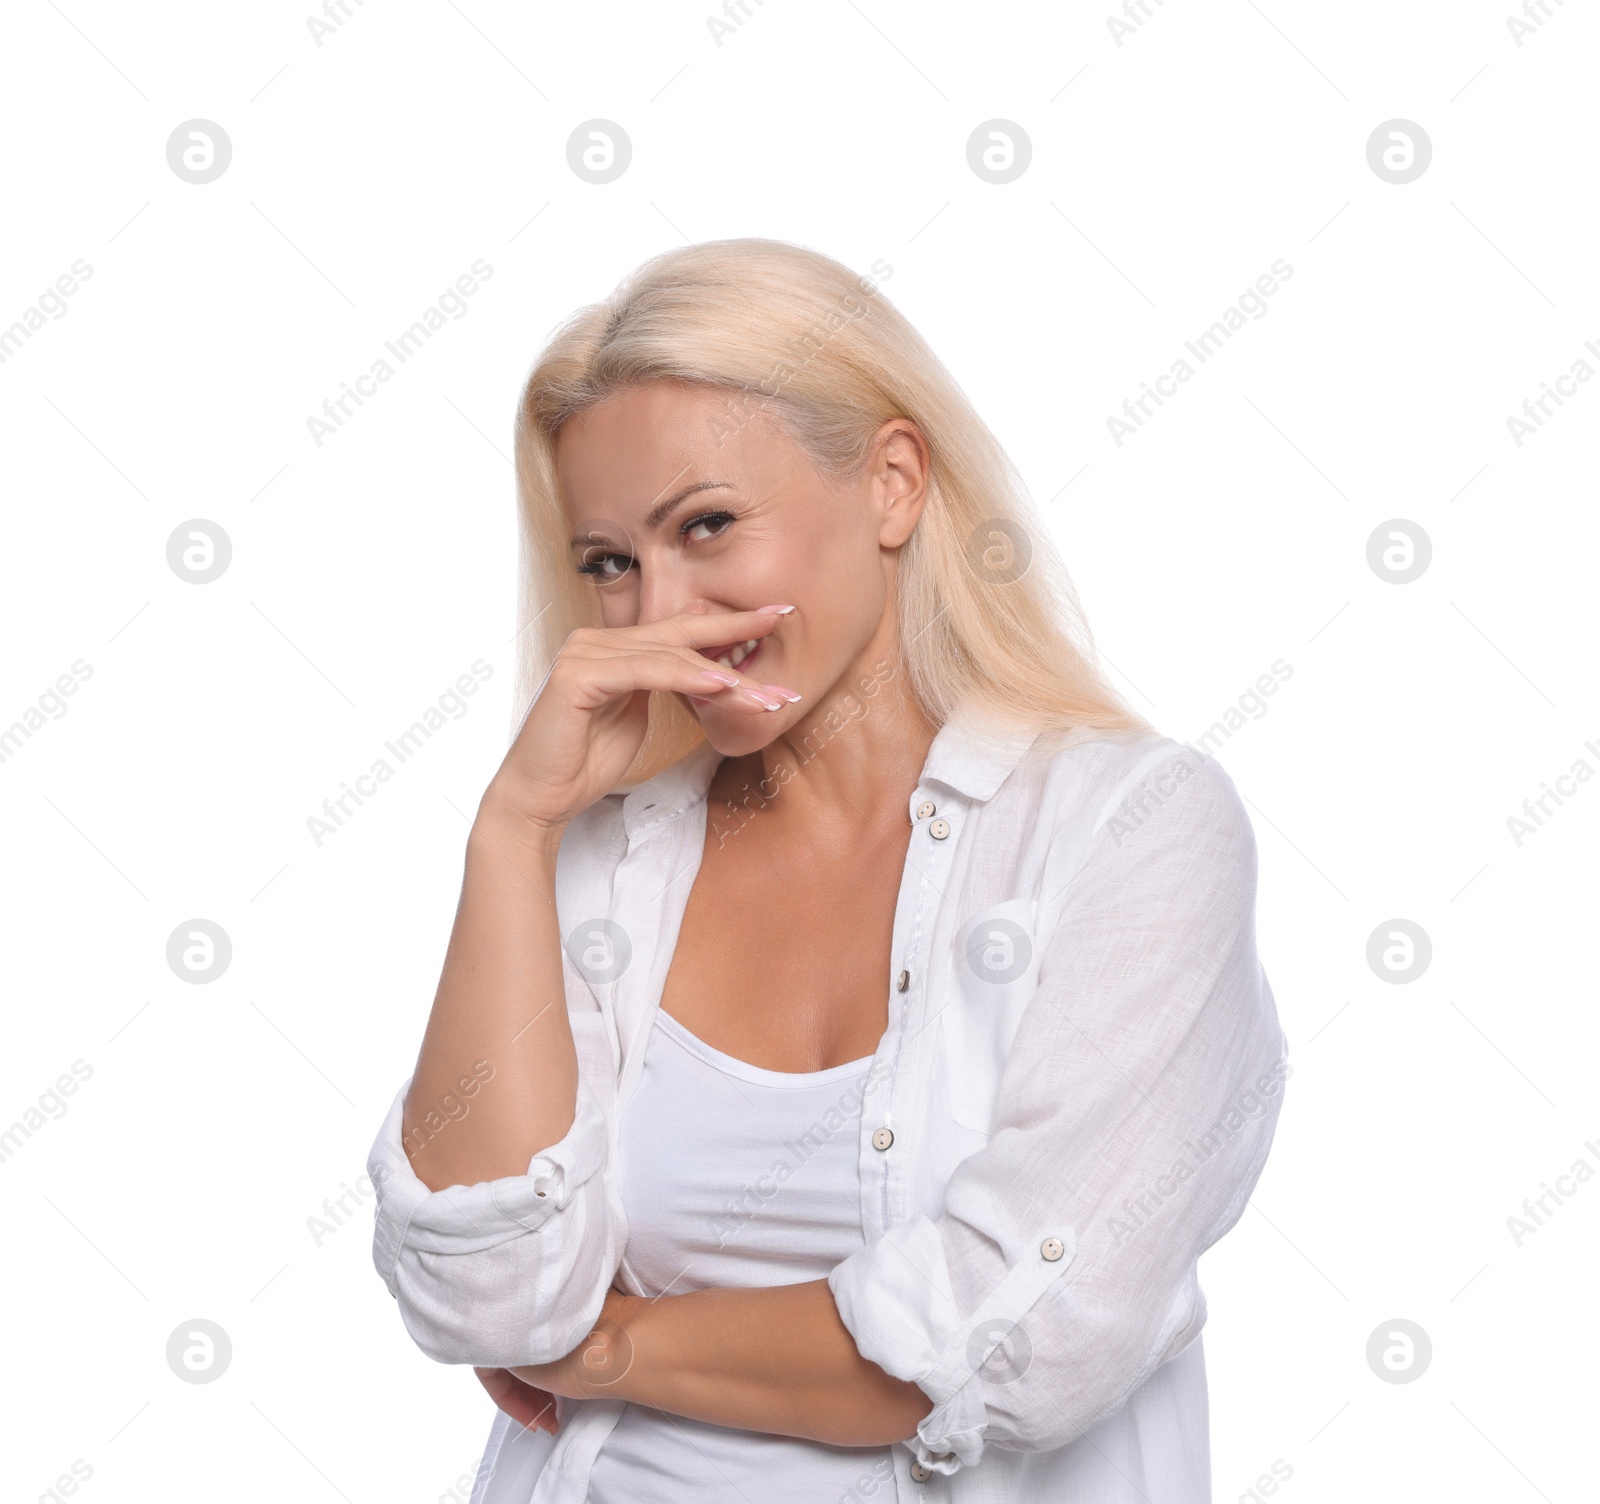 Photo of Embarrassed woman covering her smile with hand on white background